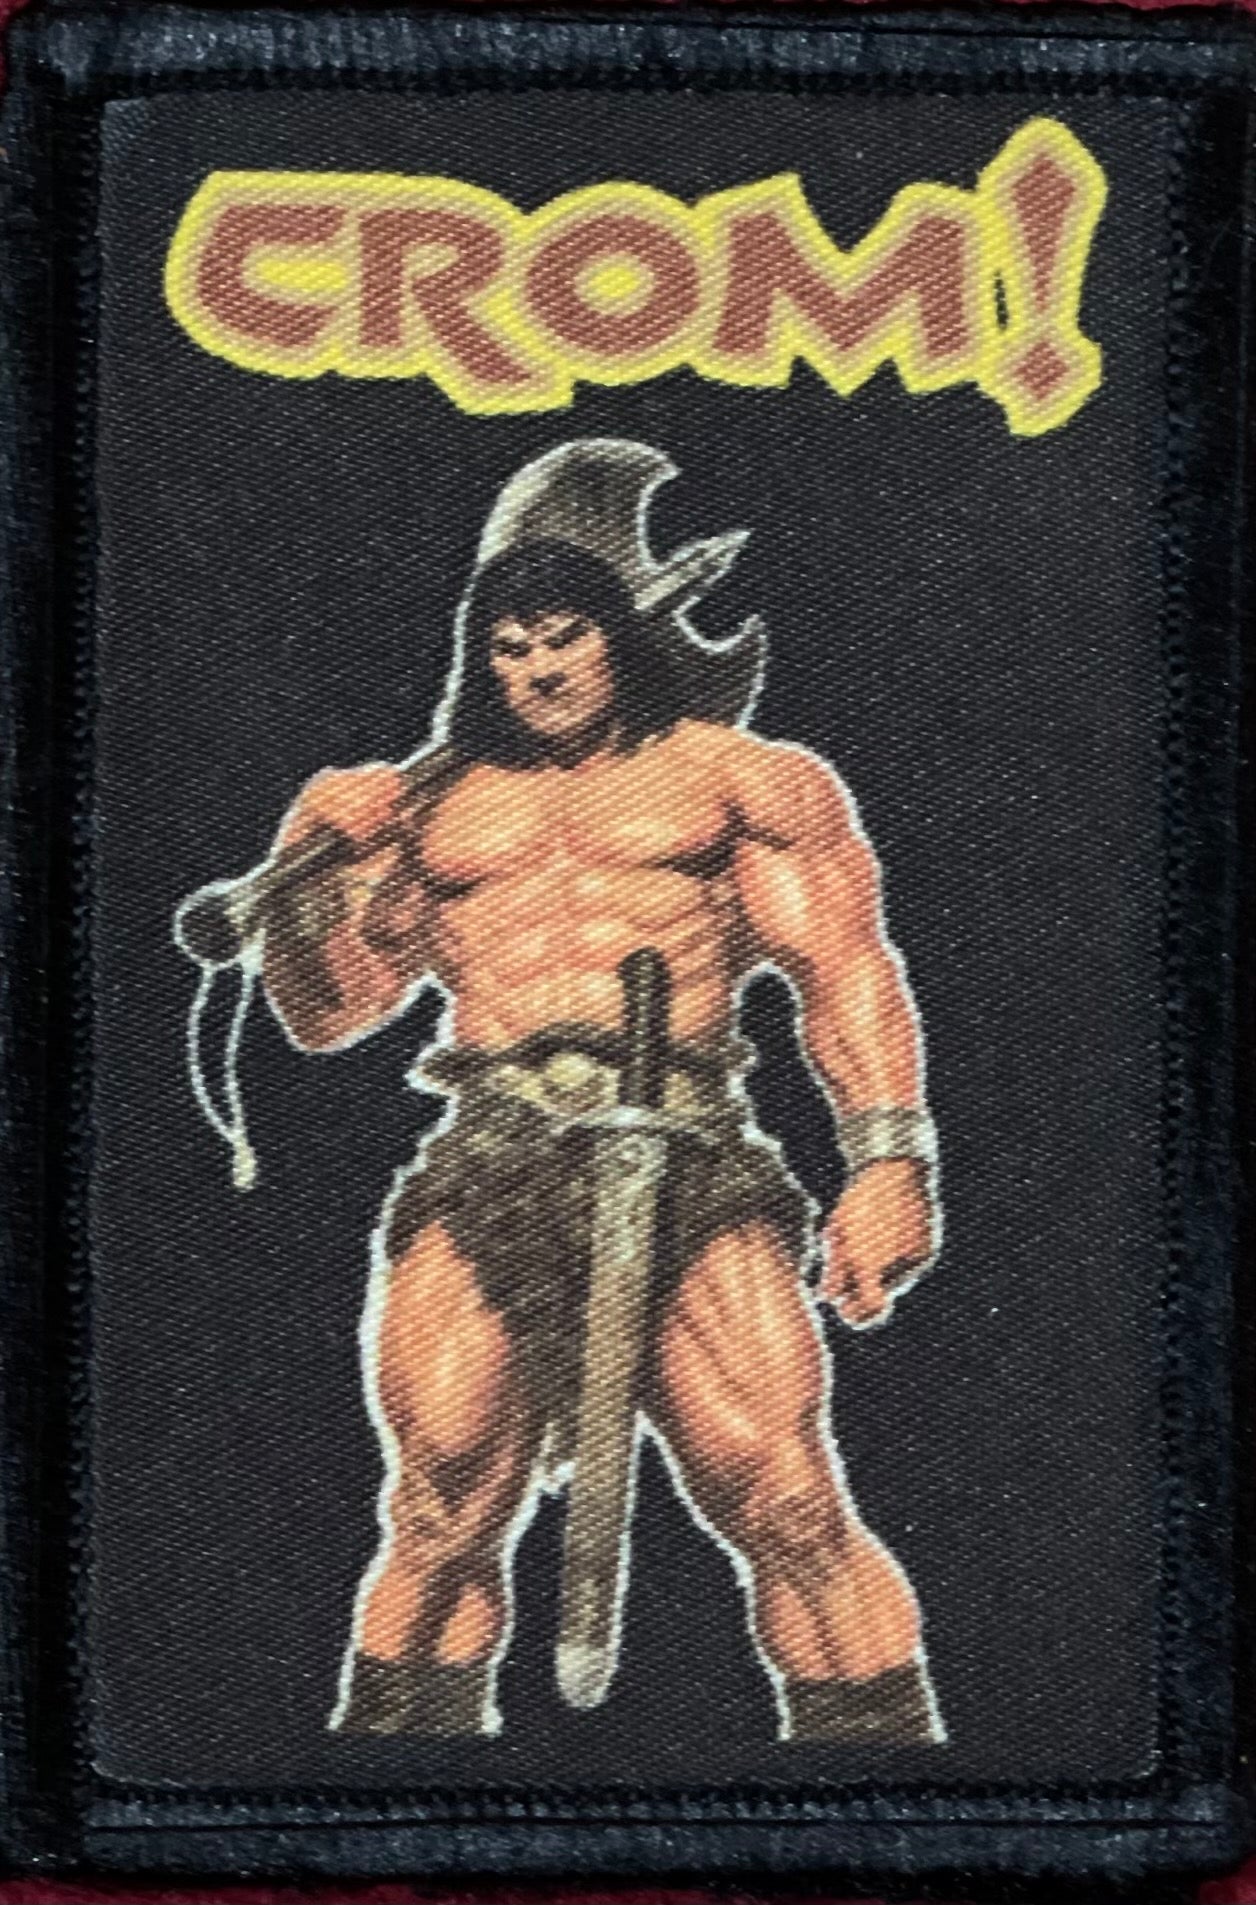 Conan the barbarian Crom Velcro Morale Patch